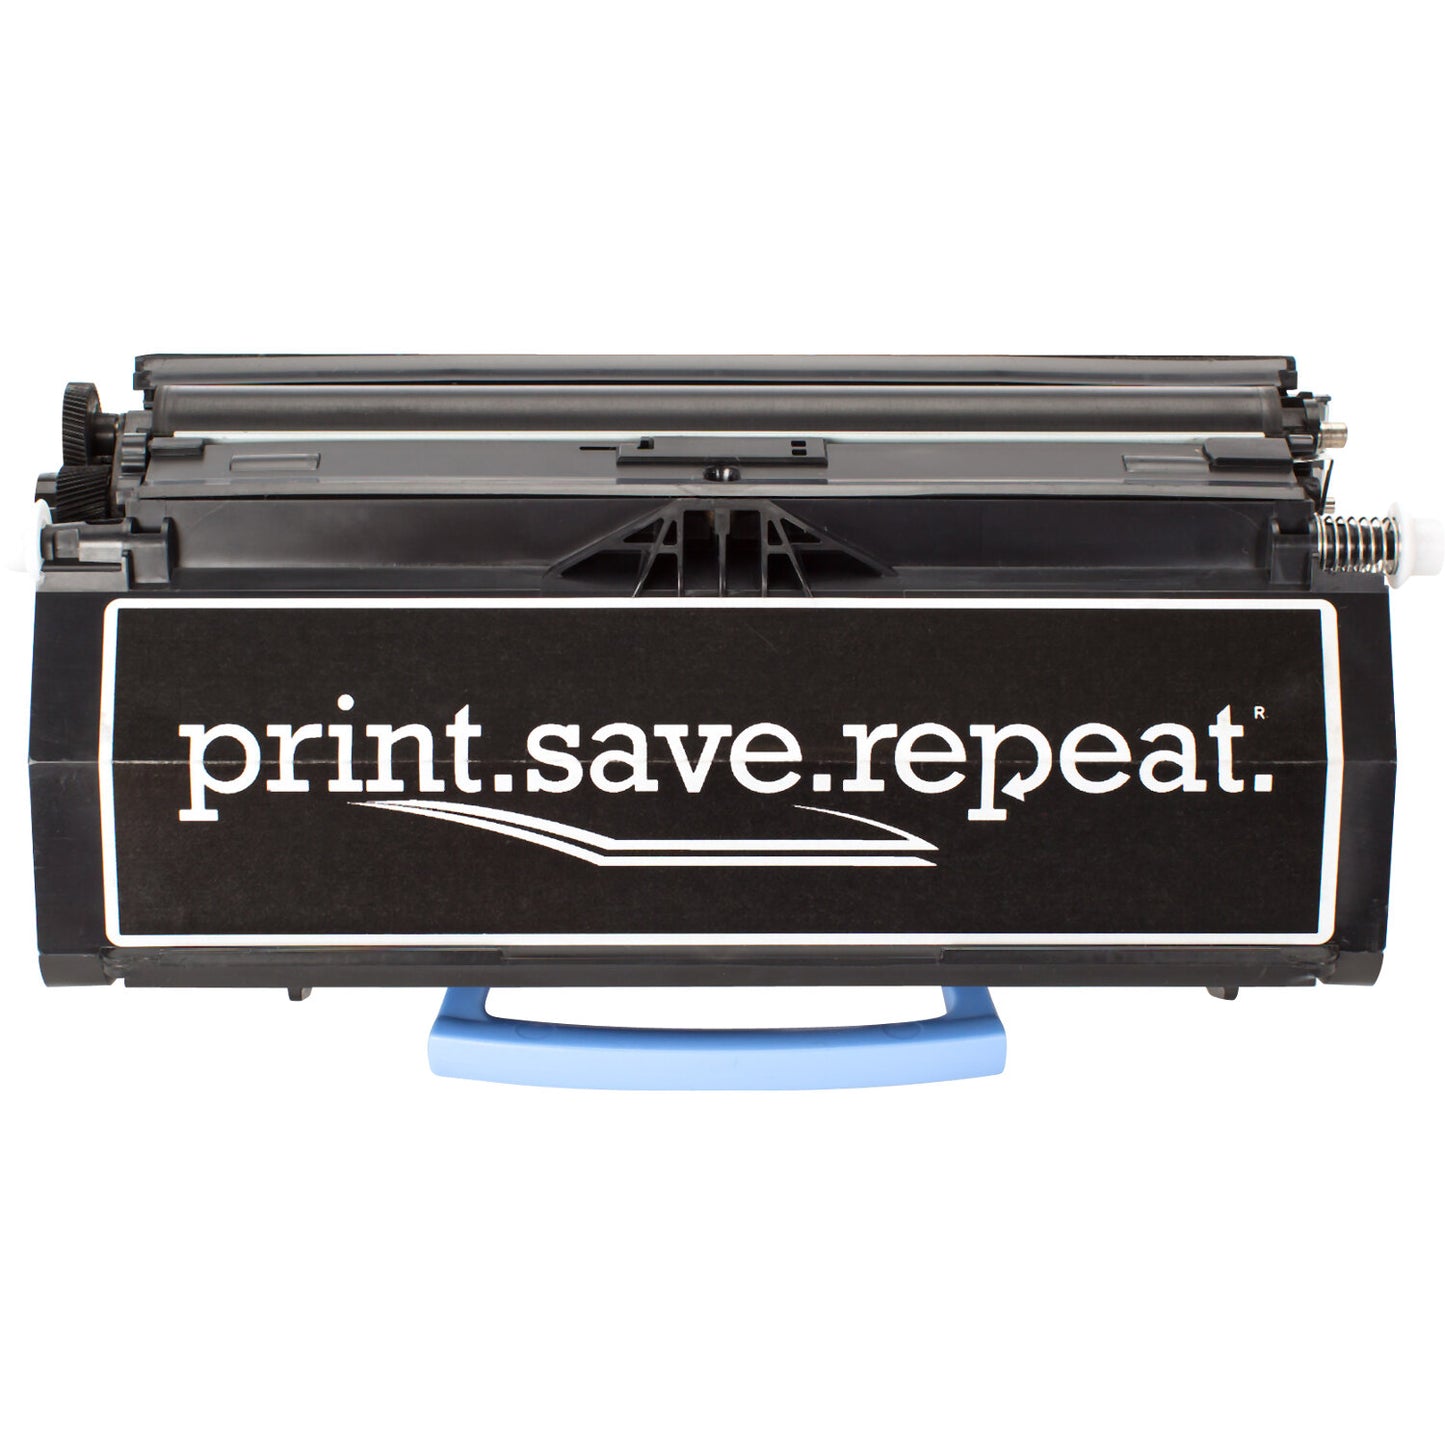 Print.Save.Repeat. Dell PK941 High Yield Remanufactured Toner Cartridge for 2330, 2350 [6,000 Pages]